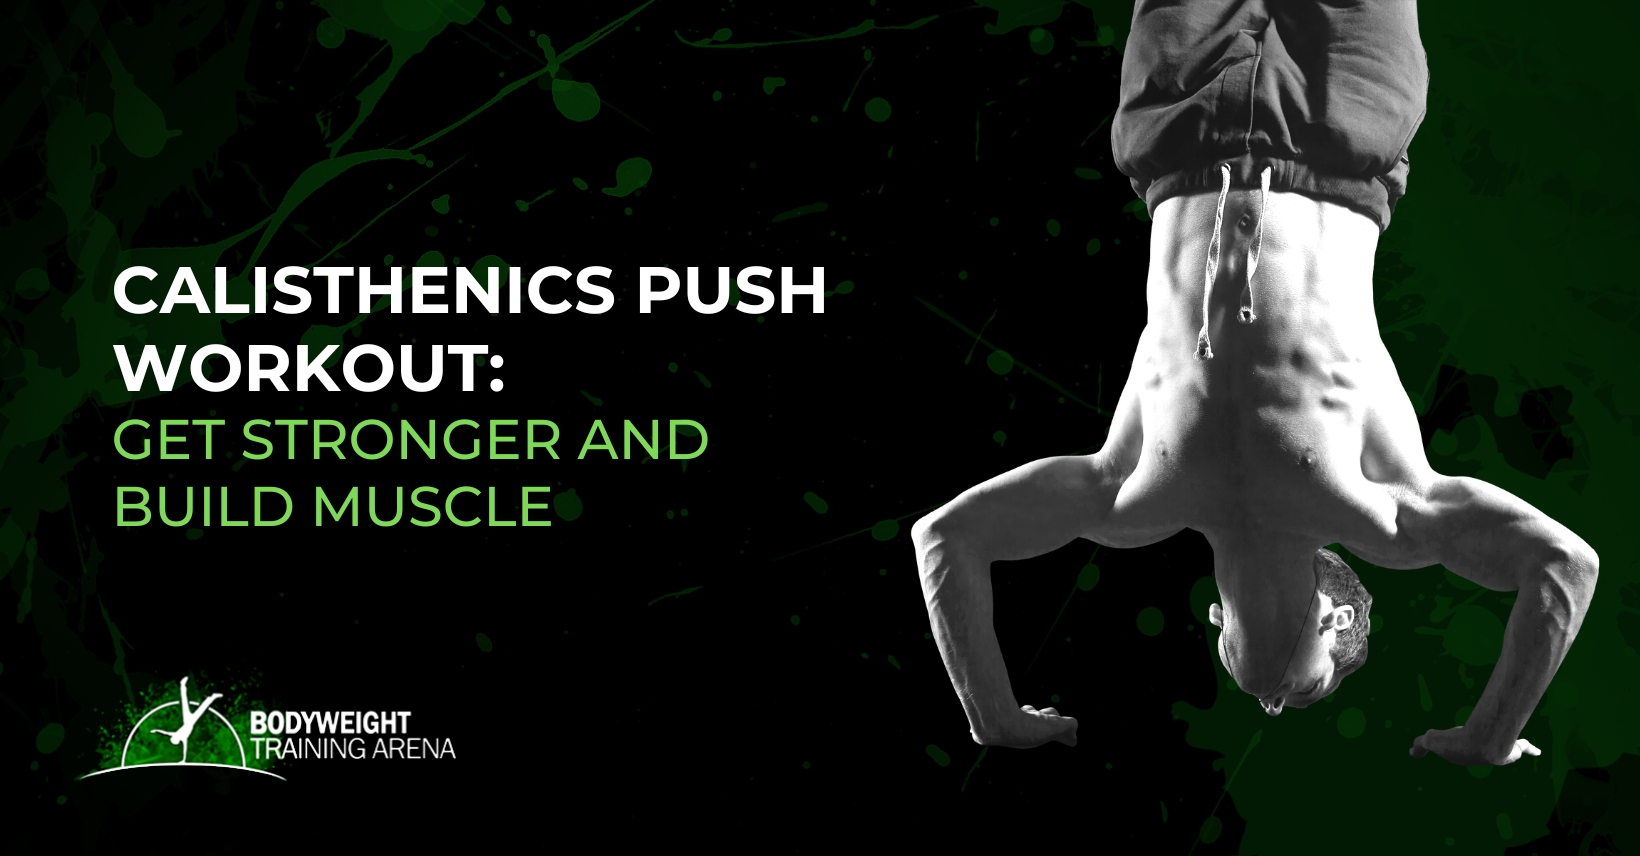 Calisthenics_Push_Workout_Get_Stronger_and_Build_Muscle